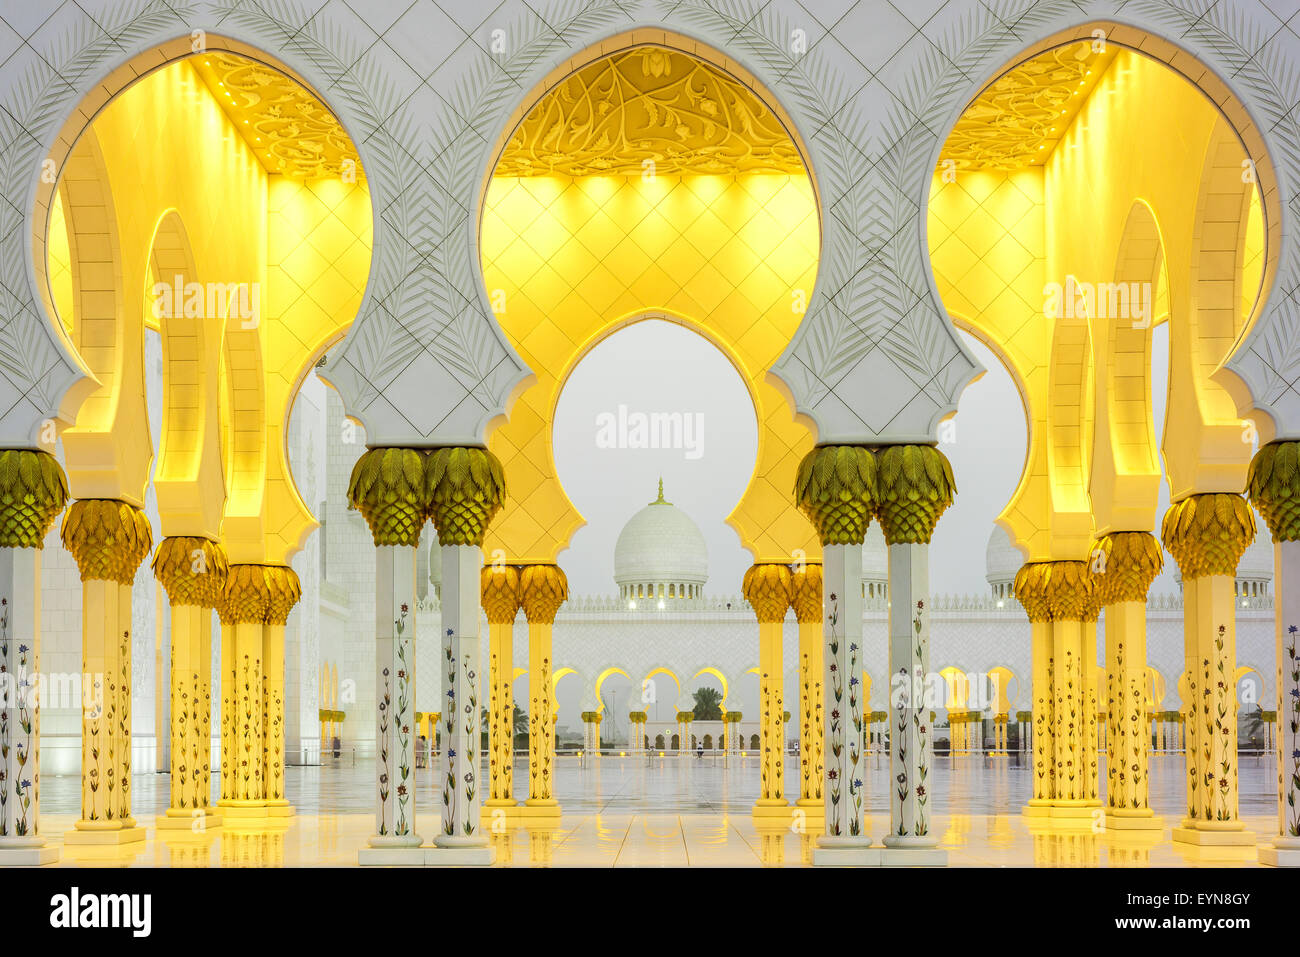 Arches surrounding central courtyard of Sheikh Zayed Grand Mosque, Abu Dhabi, United Arab Emirates Stock Photo